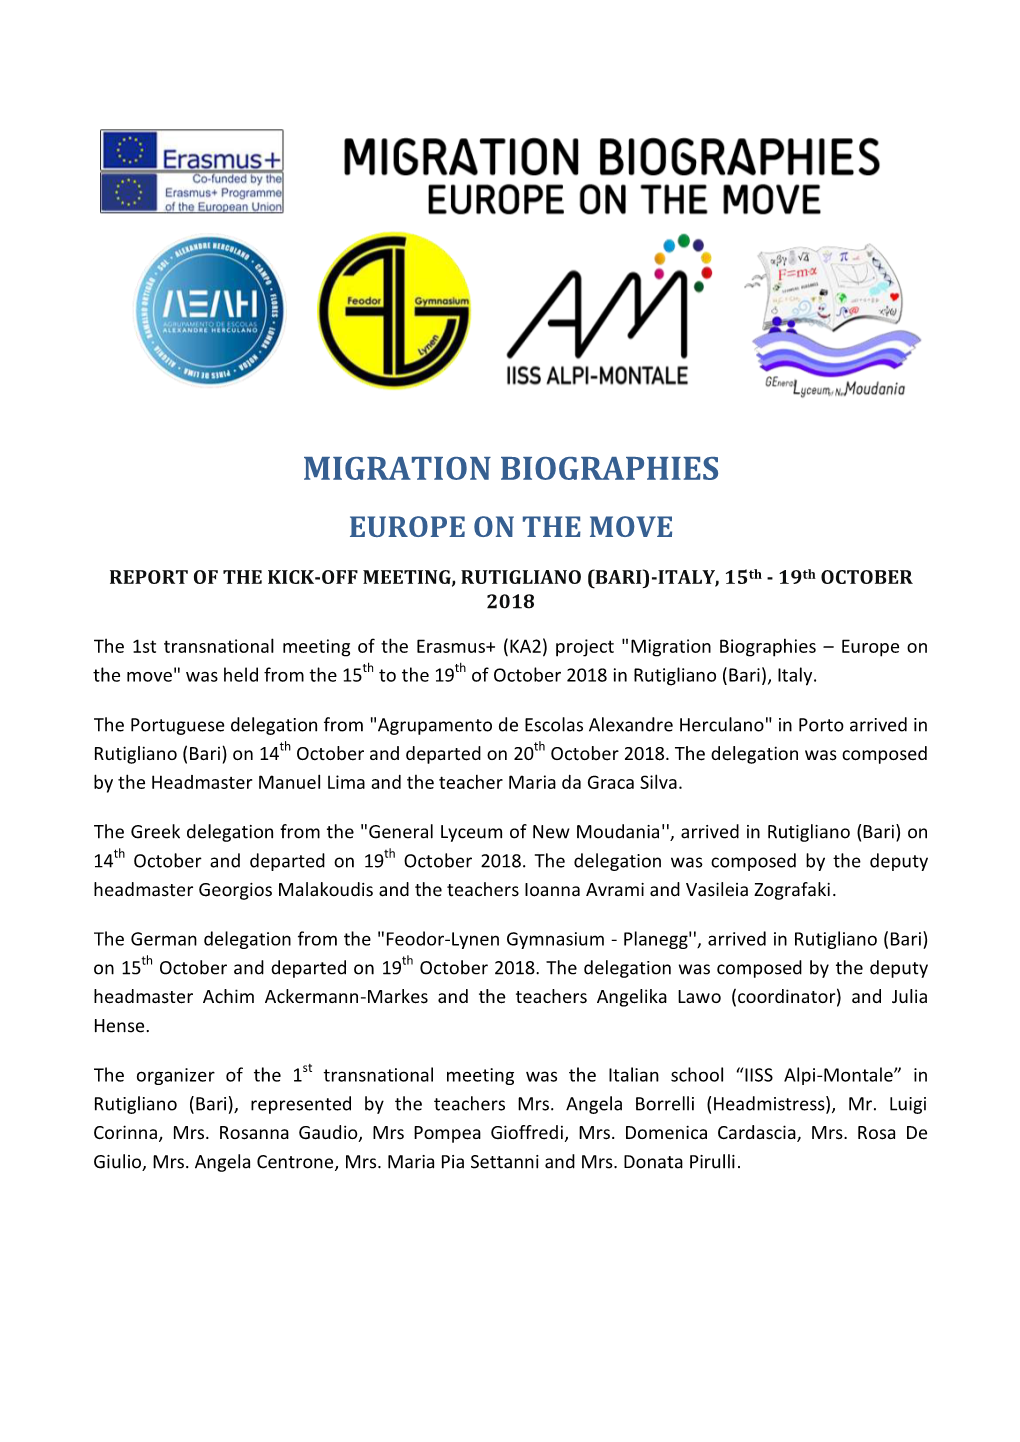 Migration Biographies Europe on the Move